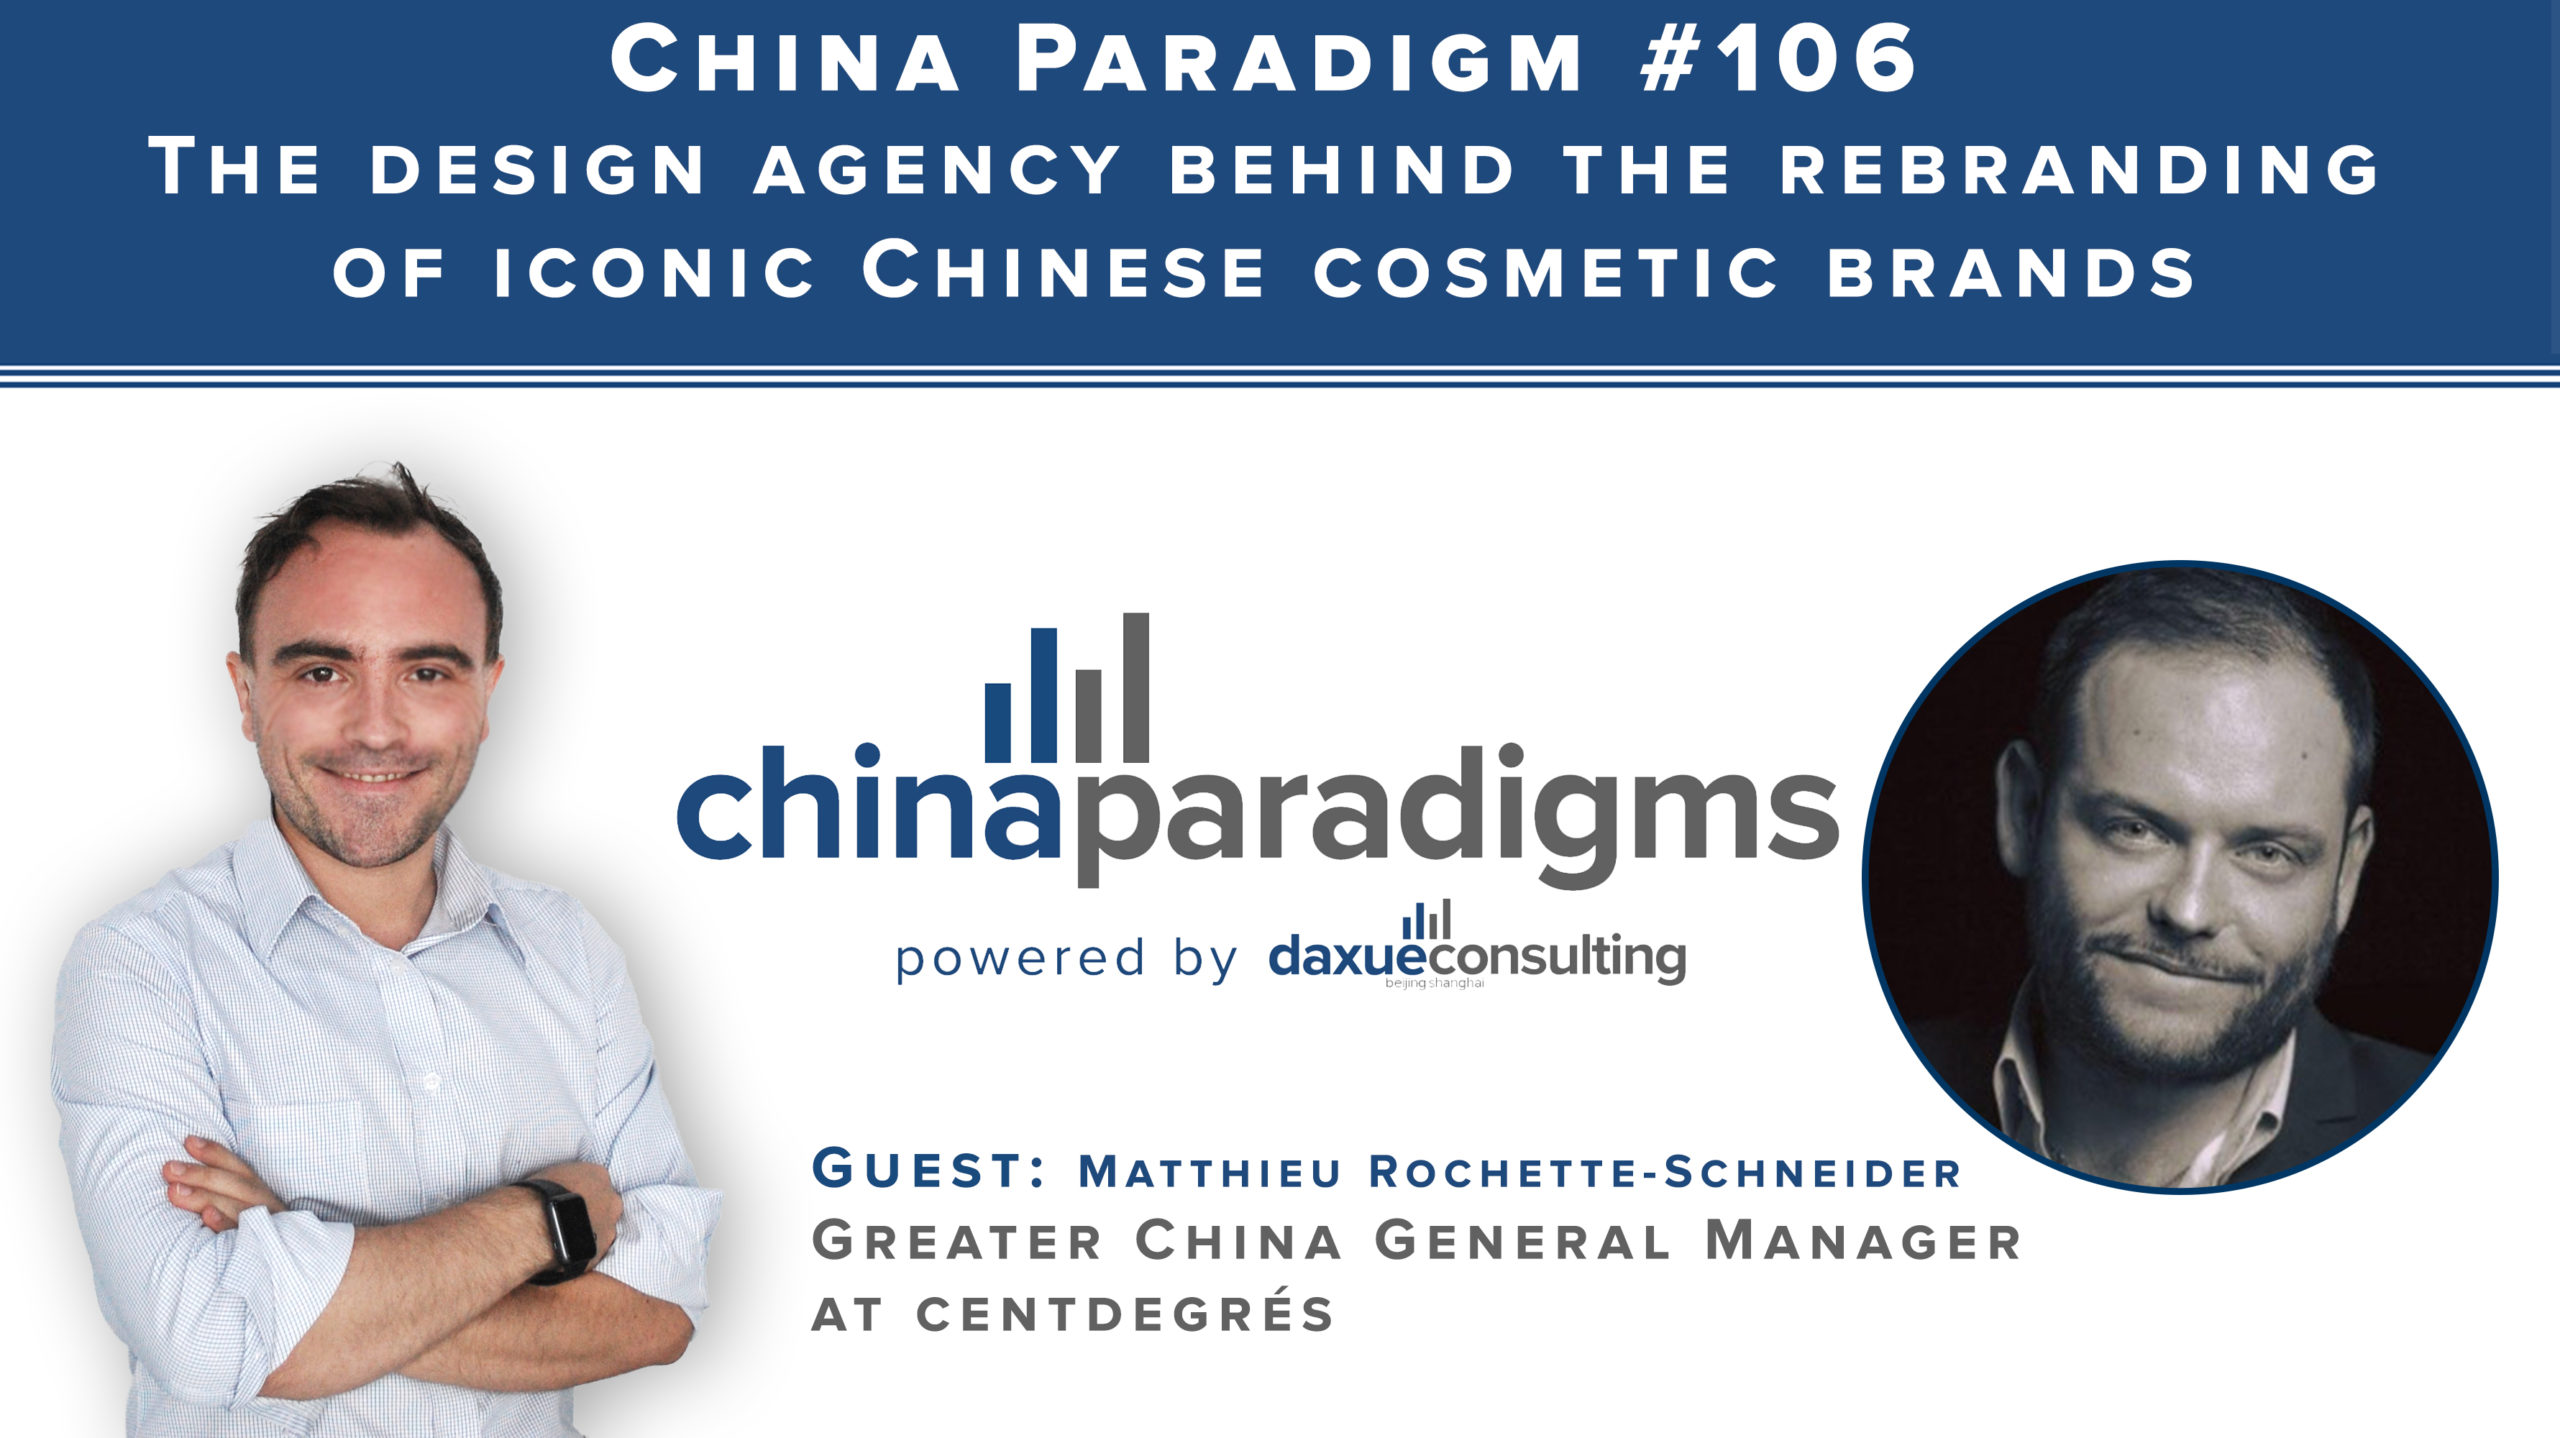 China Paradigm 106: The design agency behind the rebranding of iconic Chinese cosmetic brands